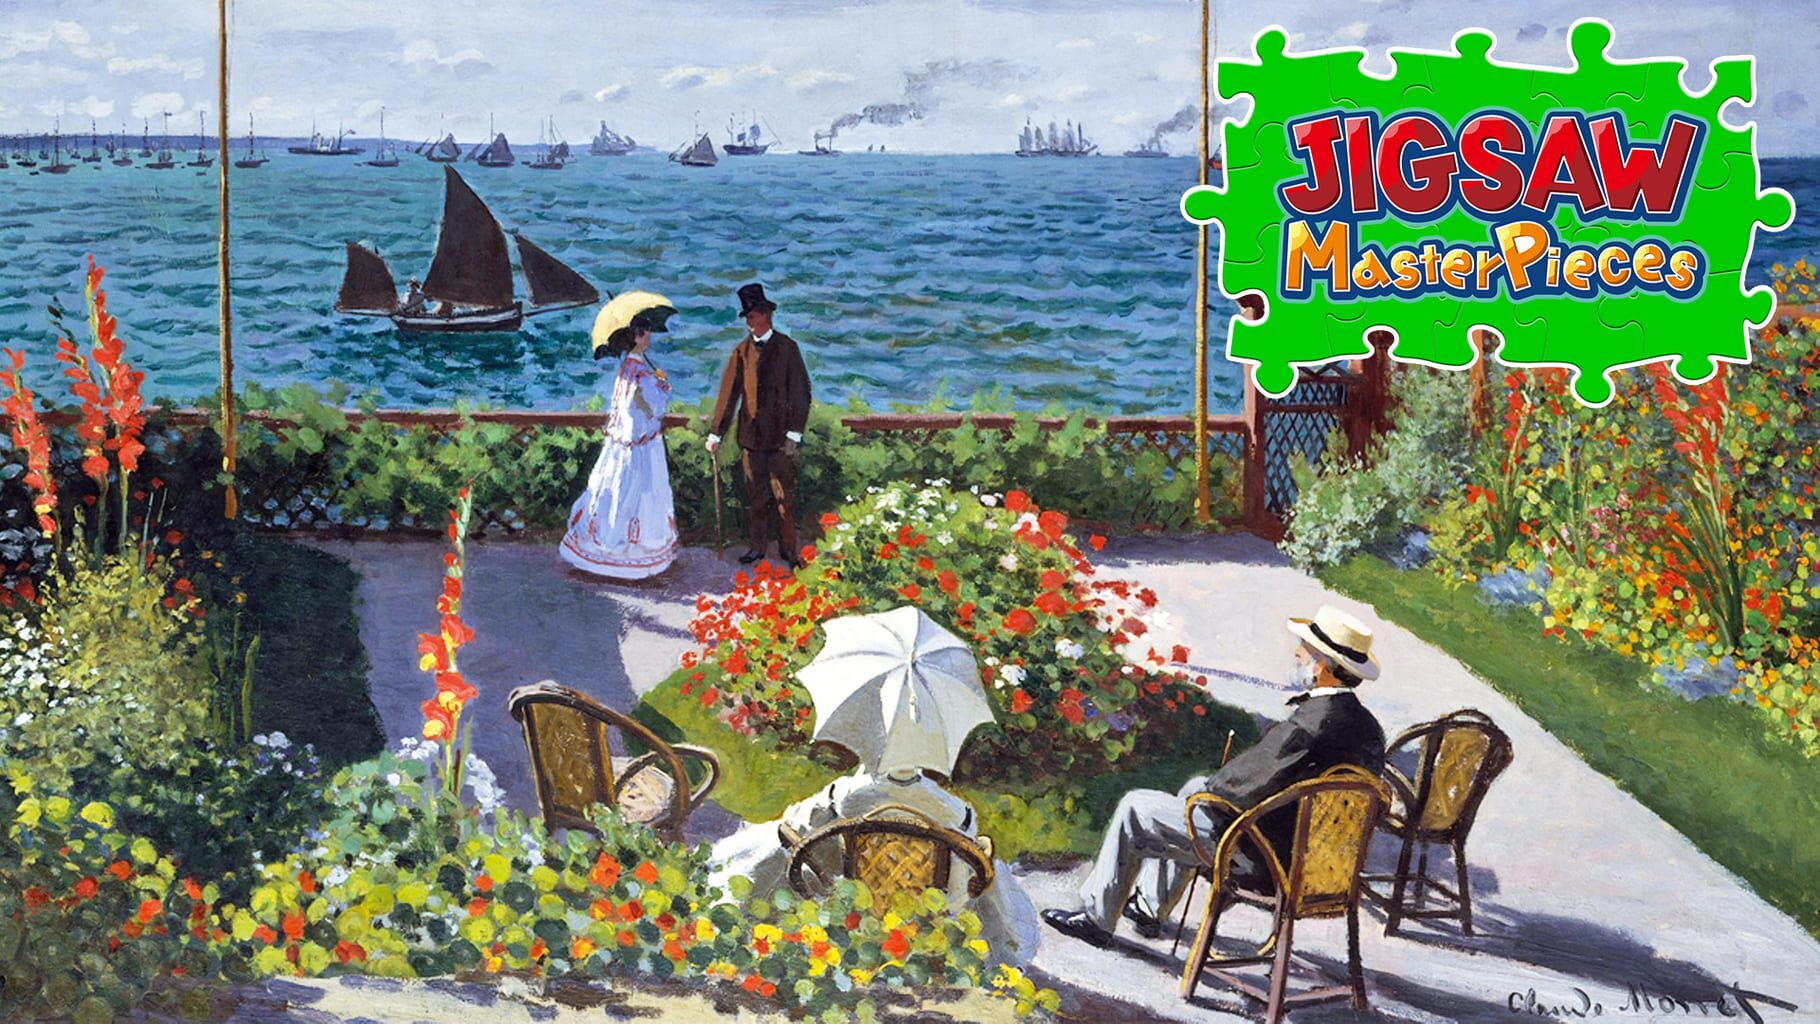 Jigsaw Masterpieces: Masterpieces of World - Brimming with Flowers artwork